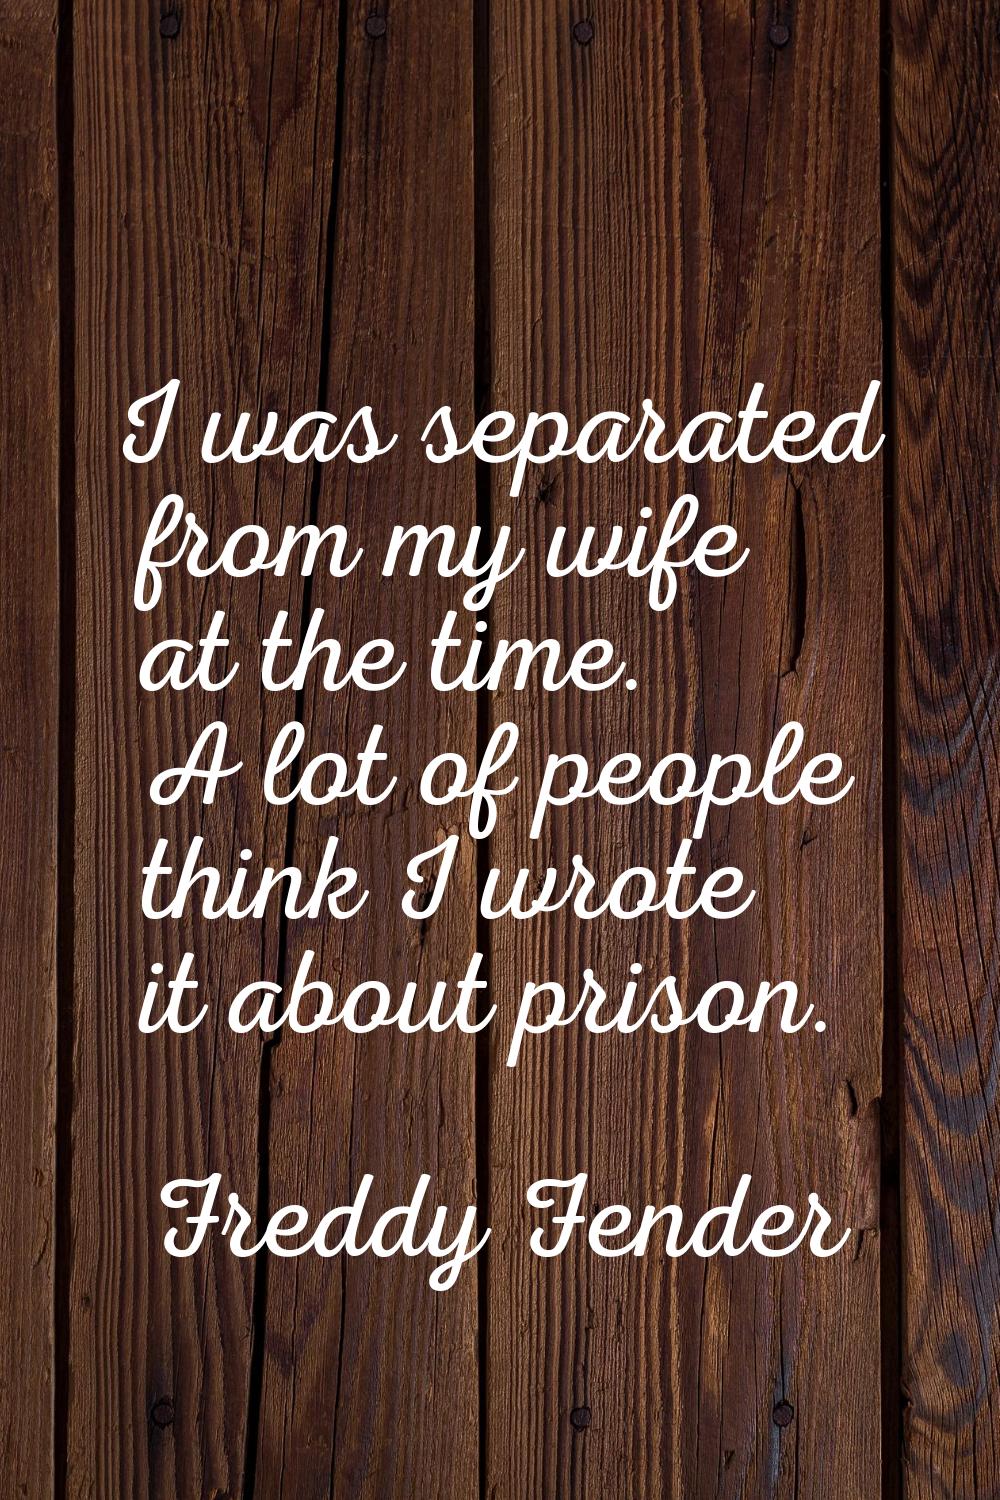 I was separated from my wife at the time. A lot of people think I wrote it about prison.